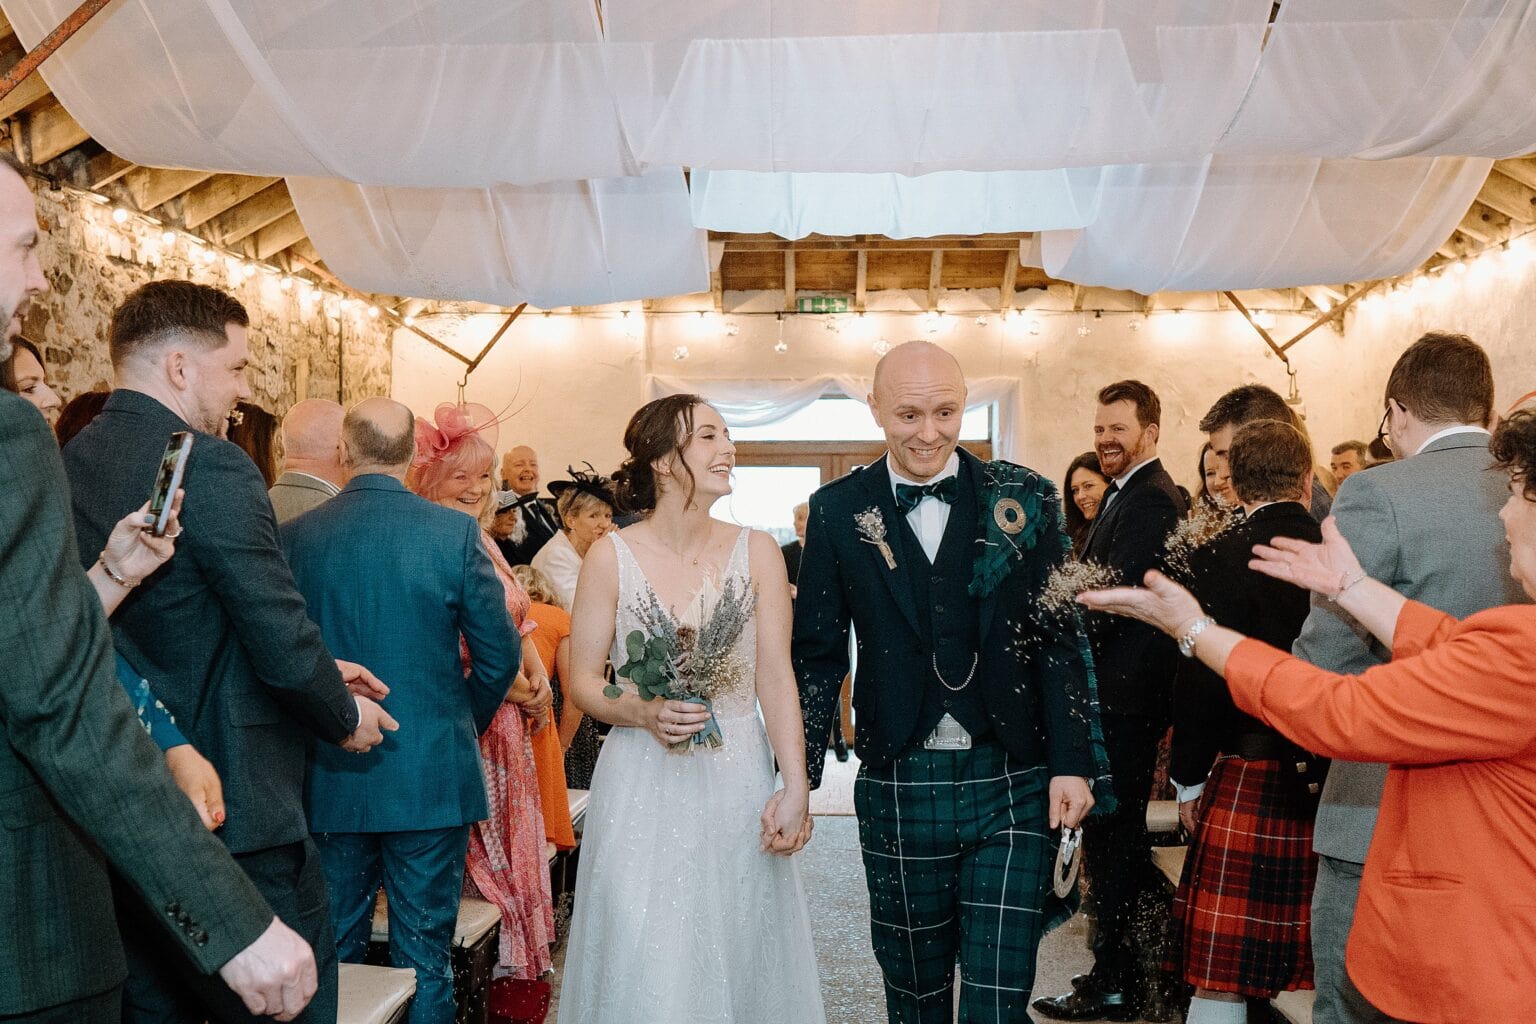 a guest tosses dried flower confetti as the bride and groom walk down the aisle holding hands following their wedding ceremony at a barn wedding venue near glasgow scotland